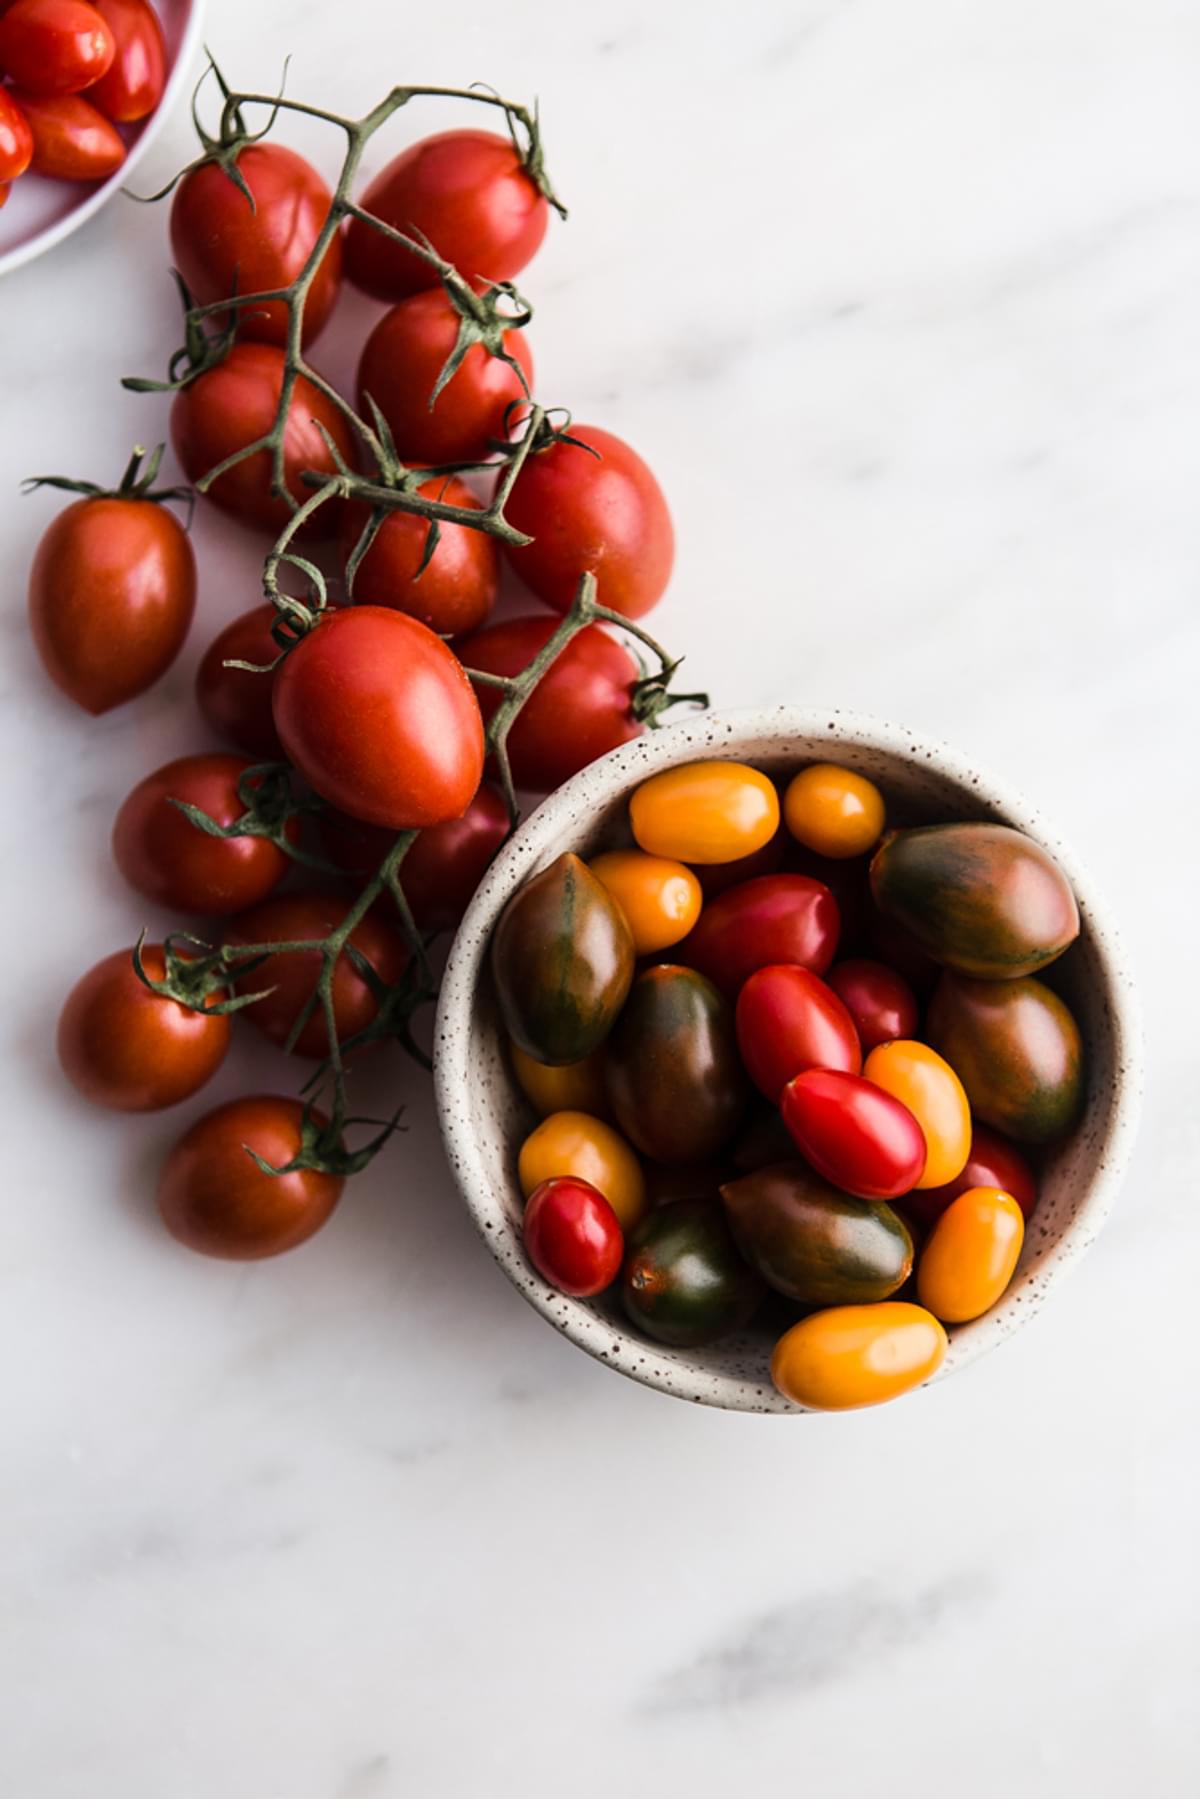 cherry tomatoes in a bowl and a few tomatoes on the vine